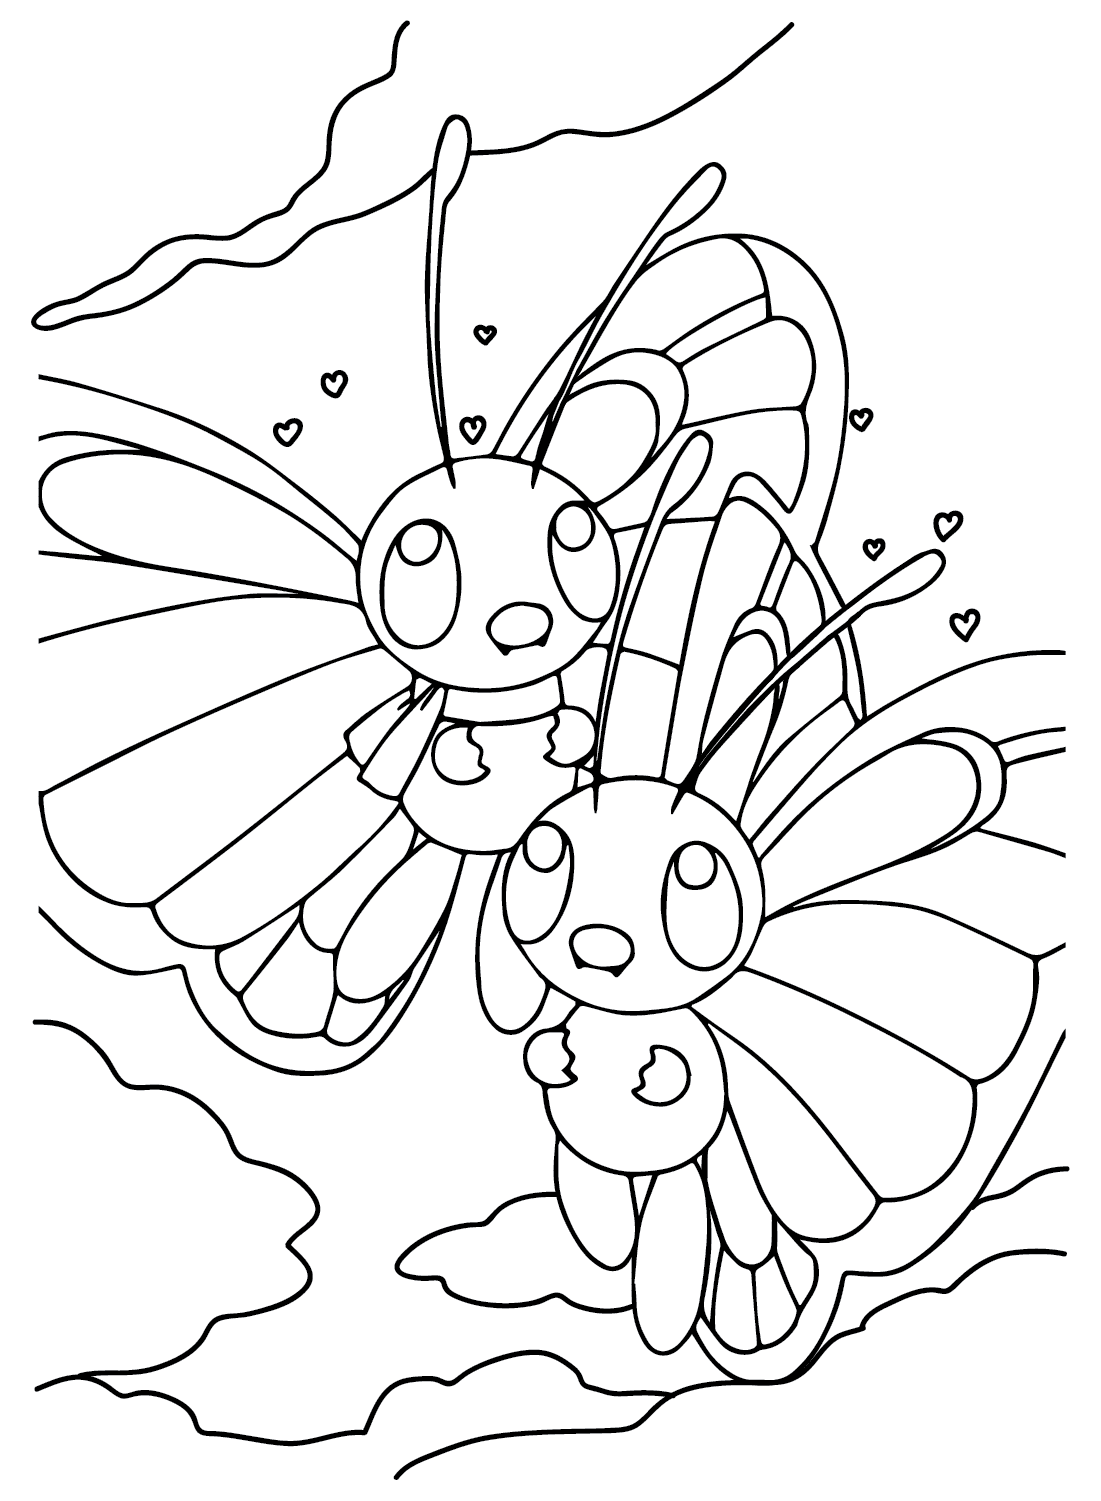 Butterfree 着色表 Butterfree